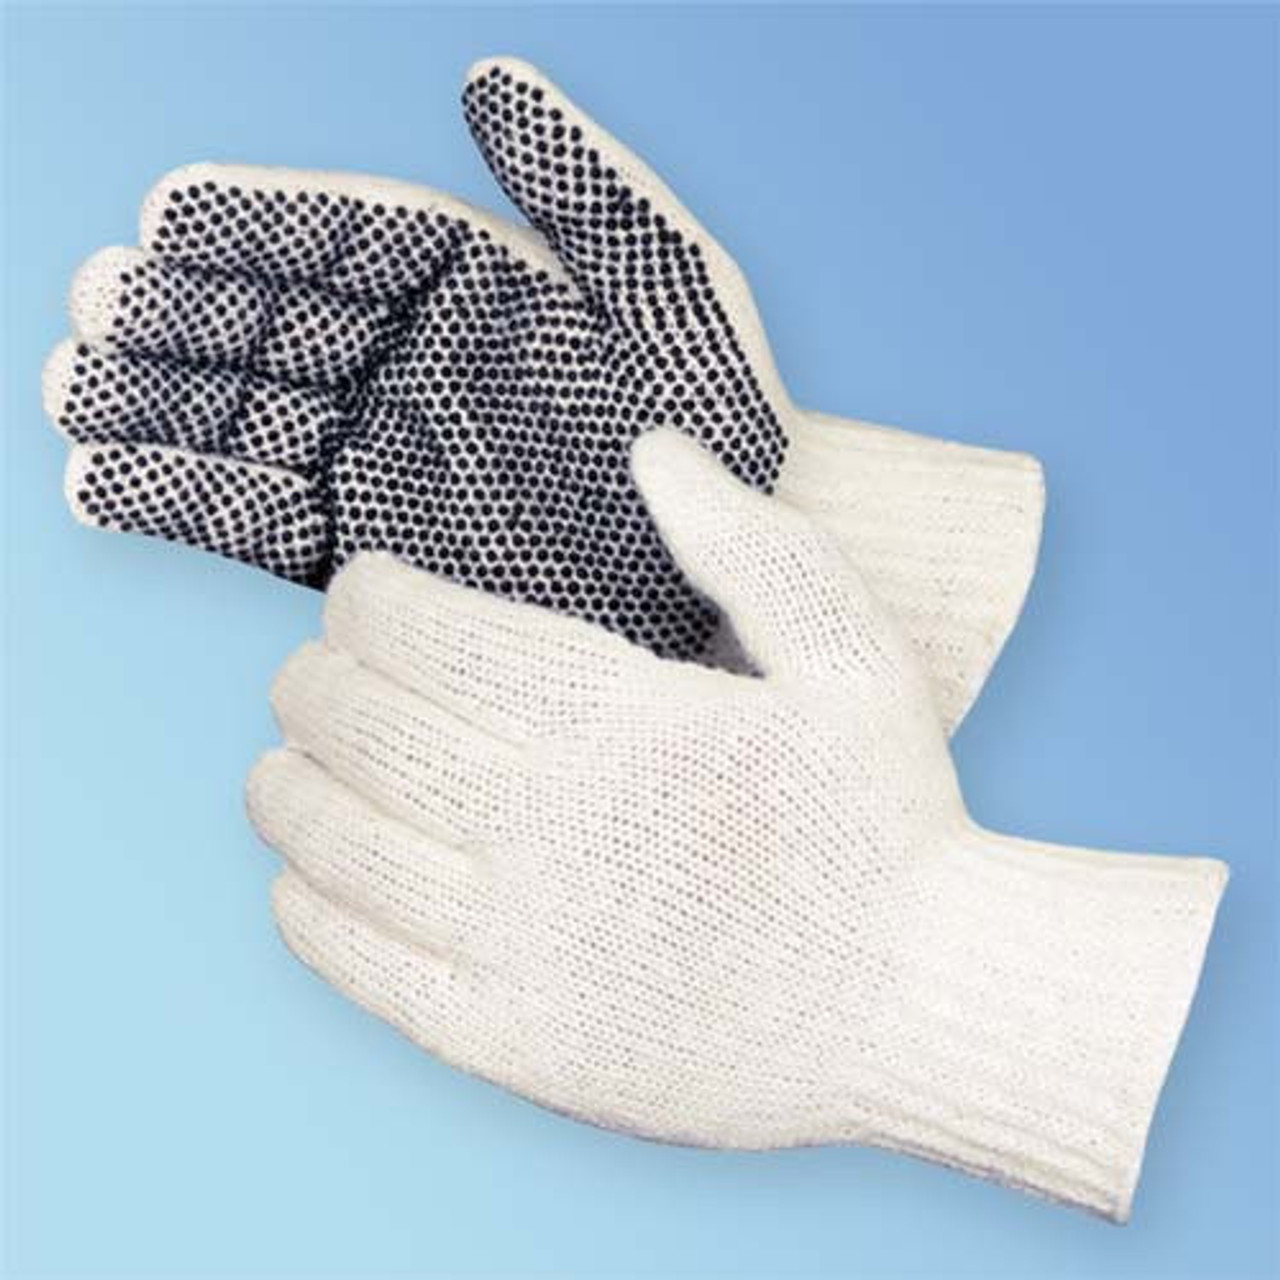 https://cdn11.bigcommerce.com/s-sb8f5ei7ew/images/stencil/1280x1280/products/8961/26414/liberty-safety-pvc-dotted-one-side-string-knit-cottonpolyester-gloves-natural-white-12pairs__63978.1668805876.jpg?c=2